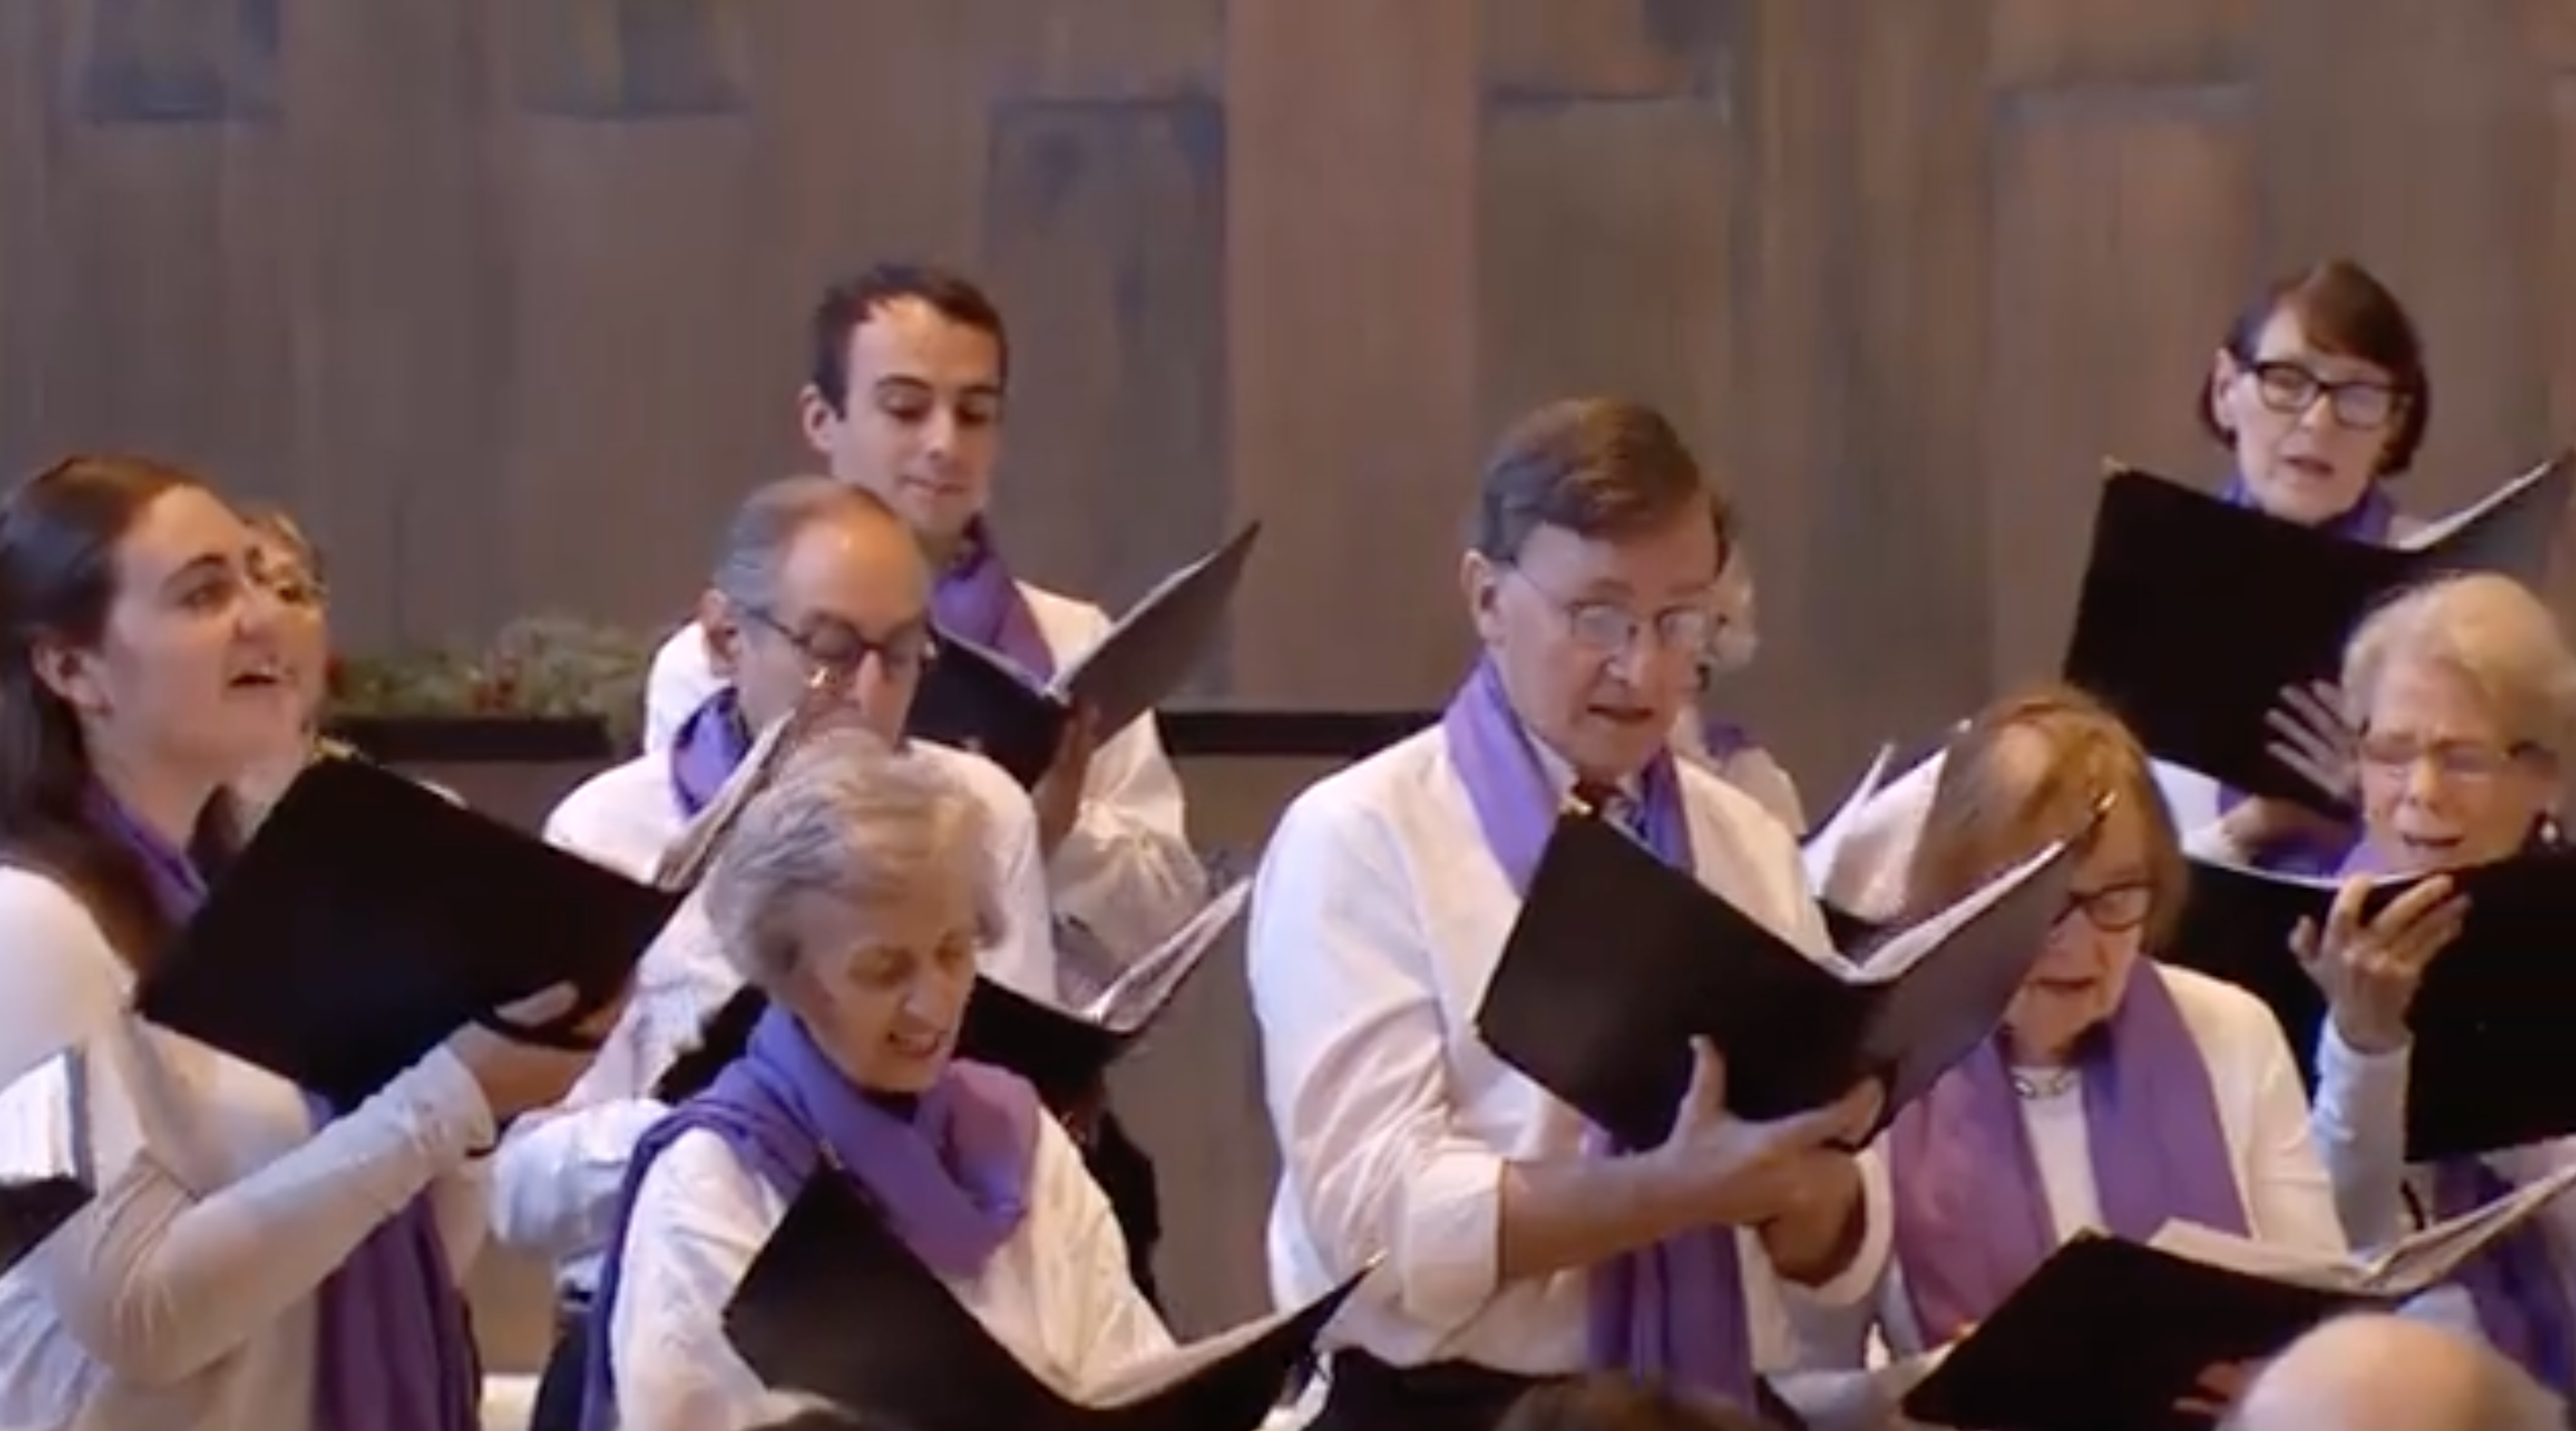 A choir specifically for dementia patients and their caregivers.